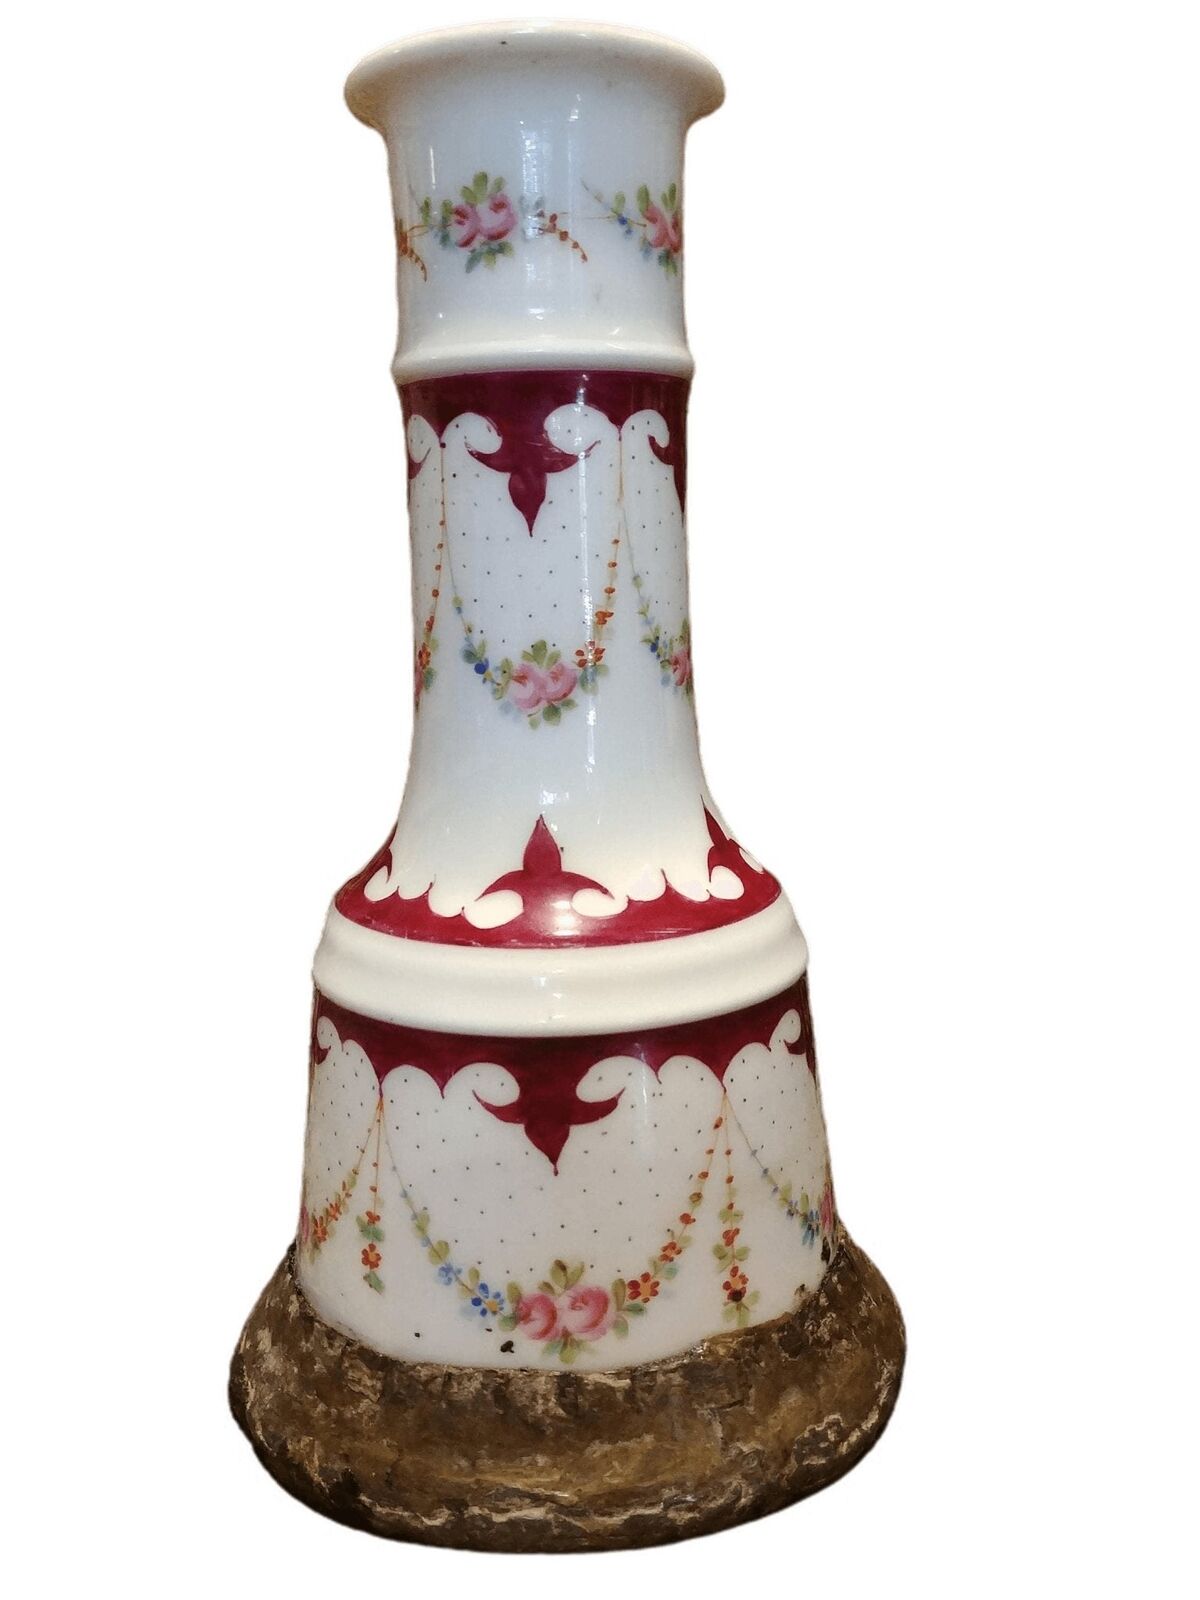 Antique Hookah Base Ornate Early 19th Century Hand Painted Porcelain